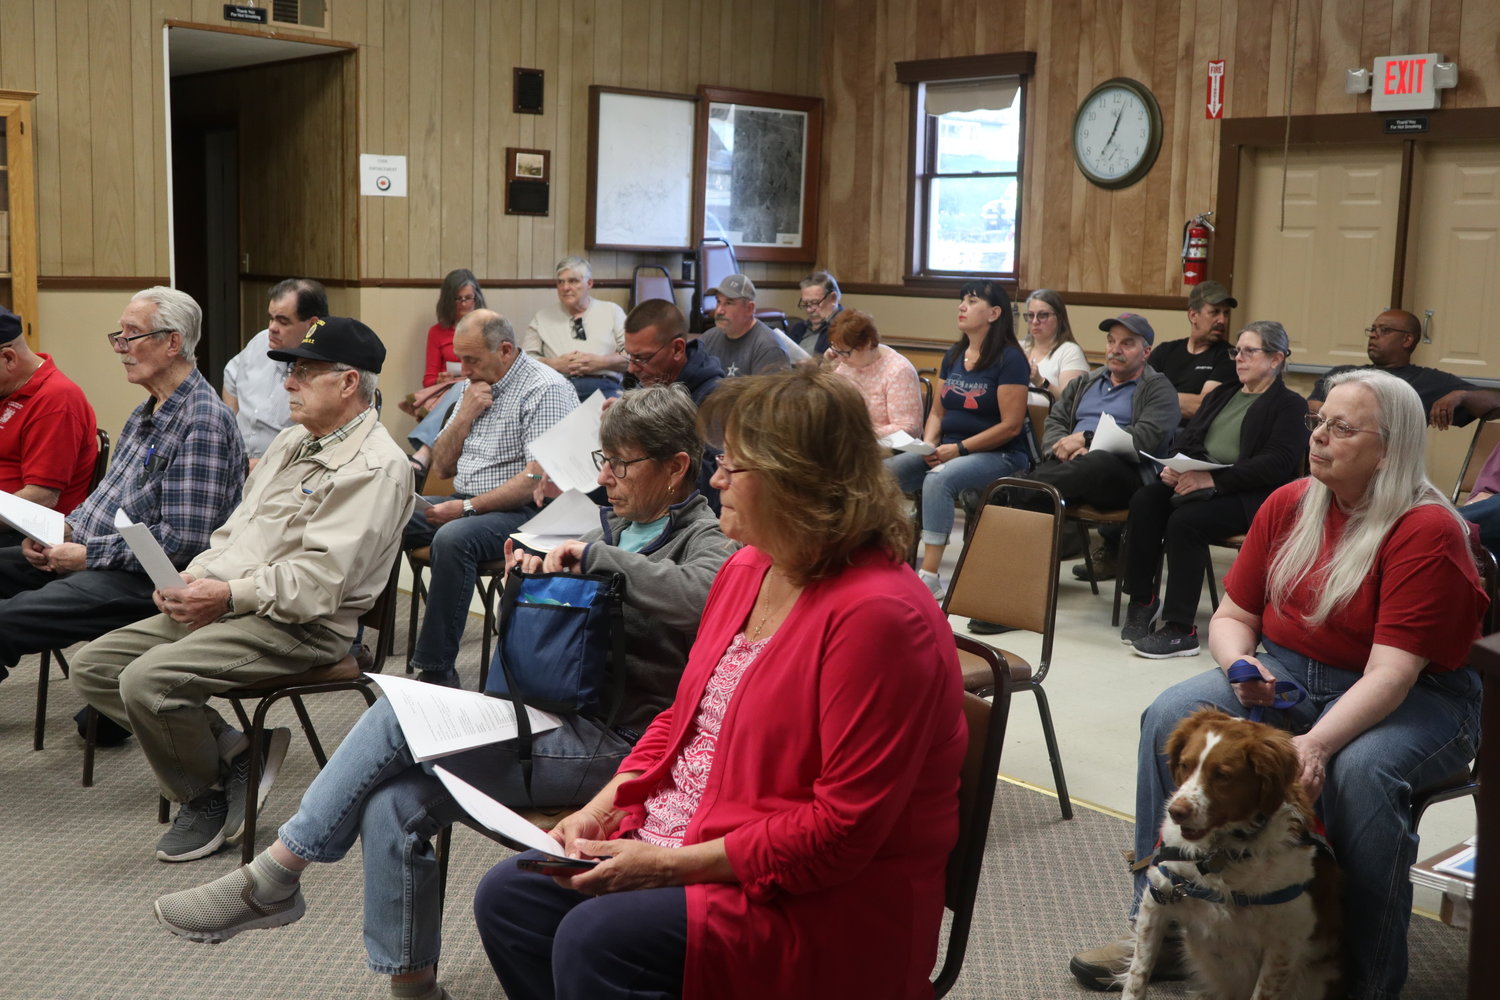 It was a full house as the Highland Town Board dealt with the constable suspension, moving of Eagle Park, establishment of a town-sponsored day camp and setting rates for short-term rental application and permitting fees.